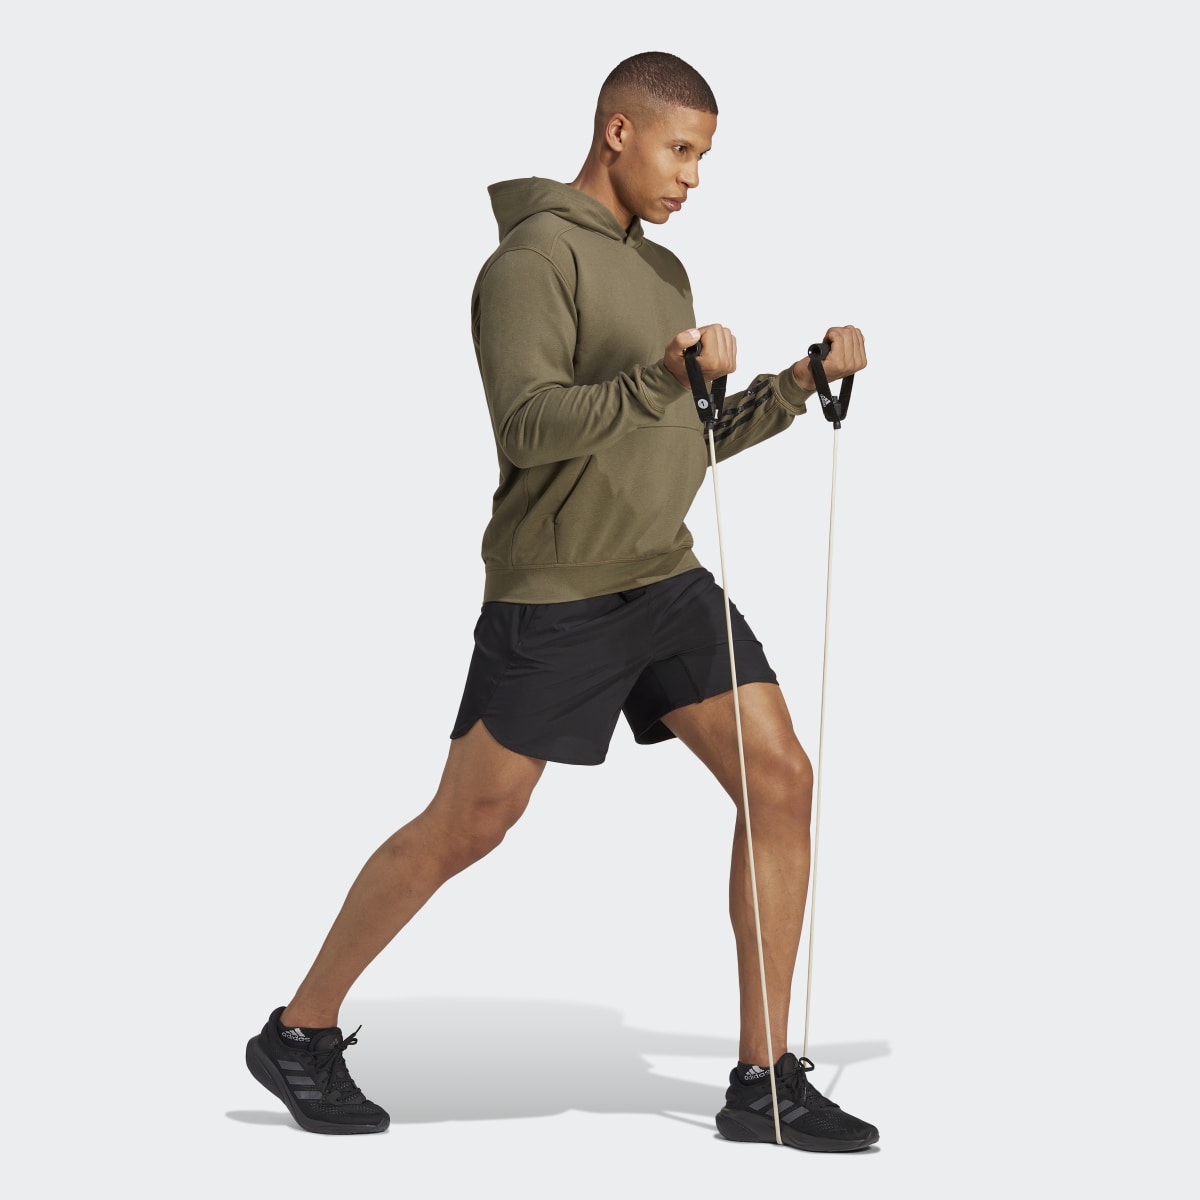 Adidas Curated by Cody Rigsby HIIT Hoodie. 4